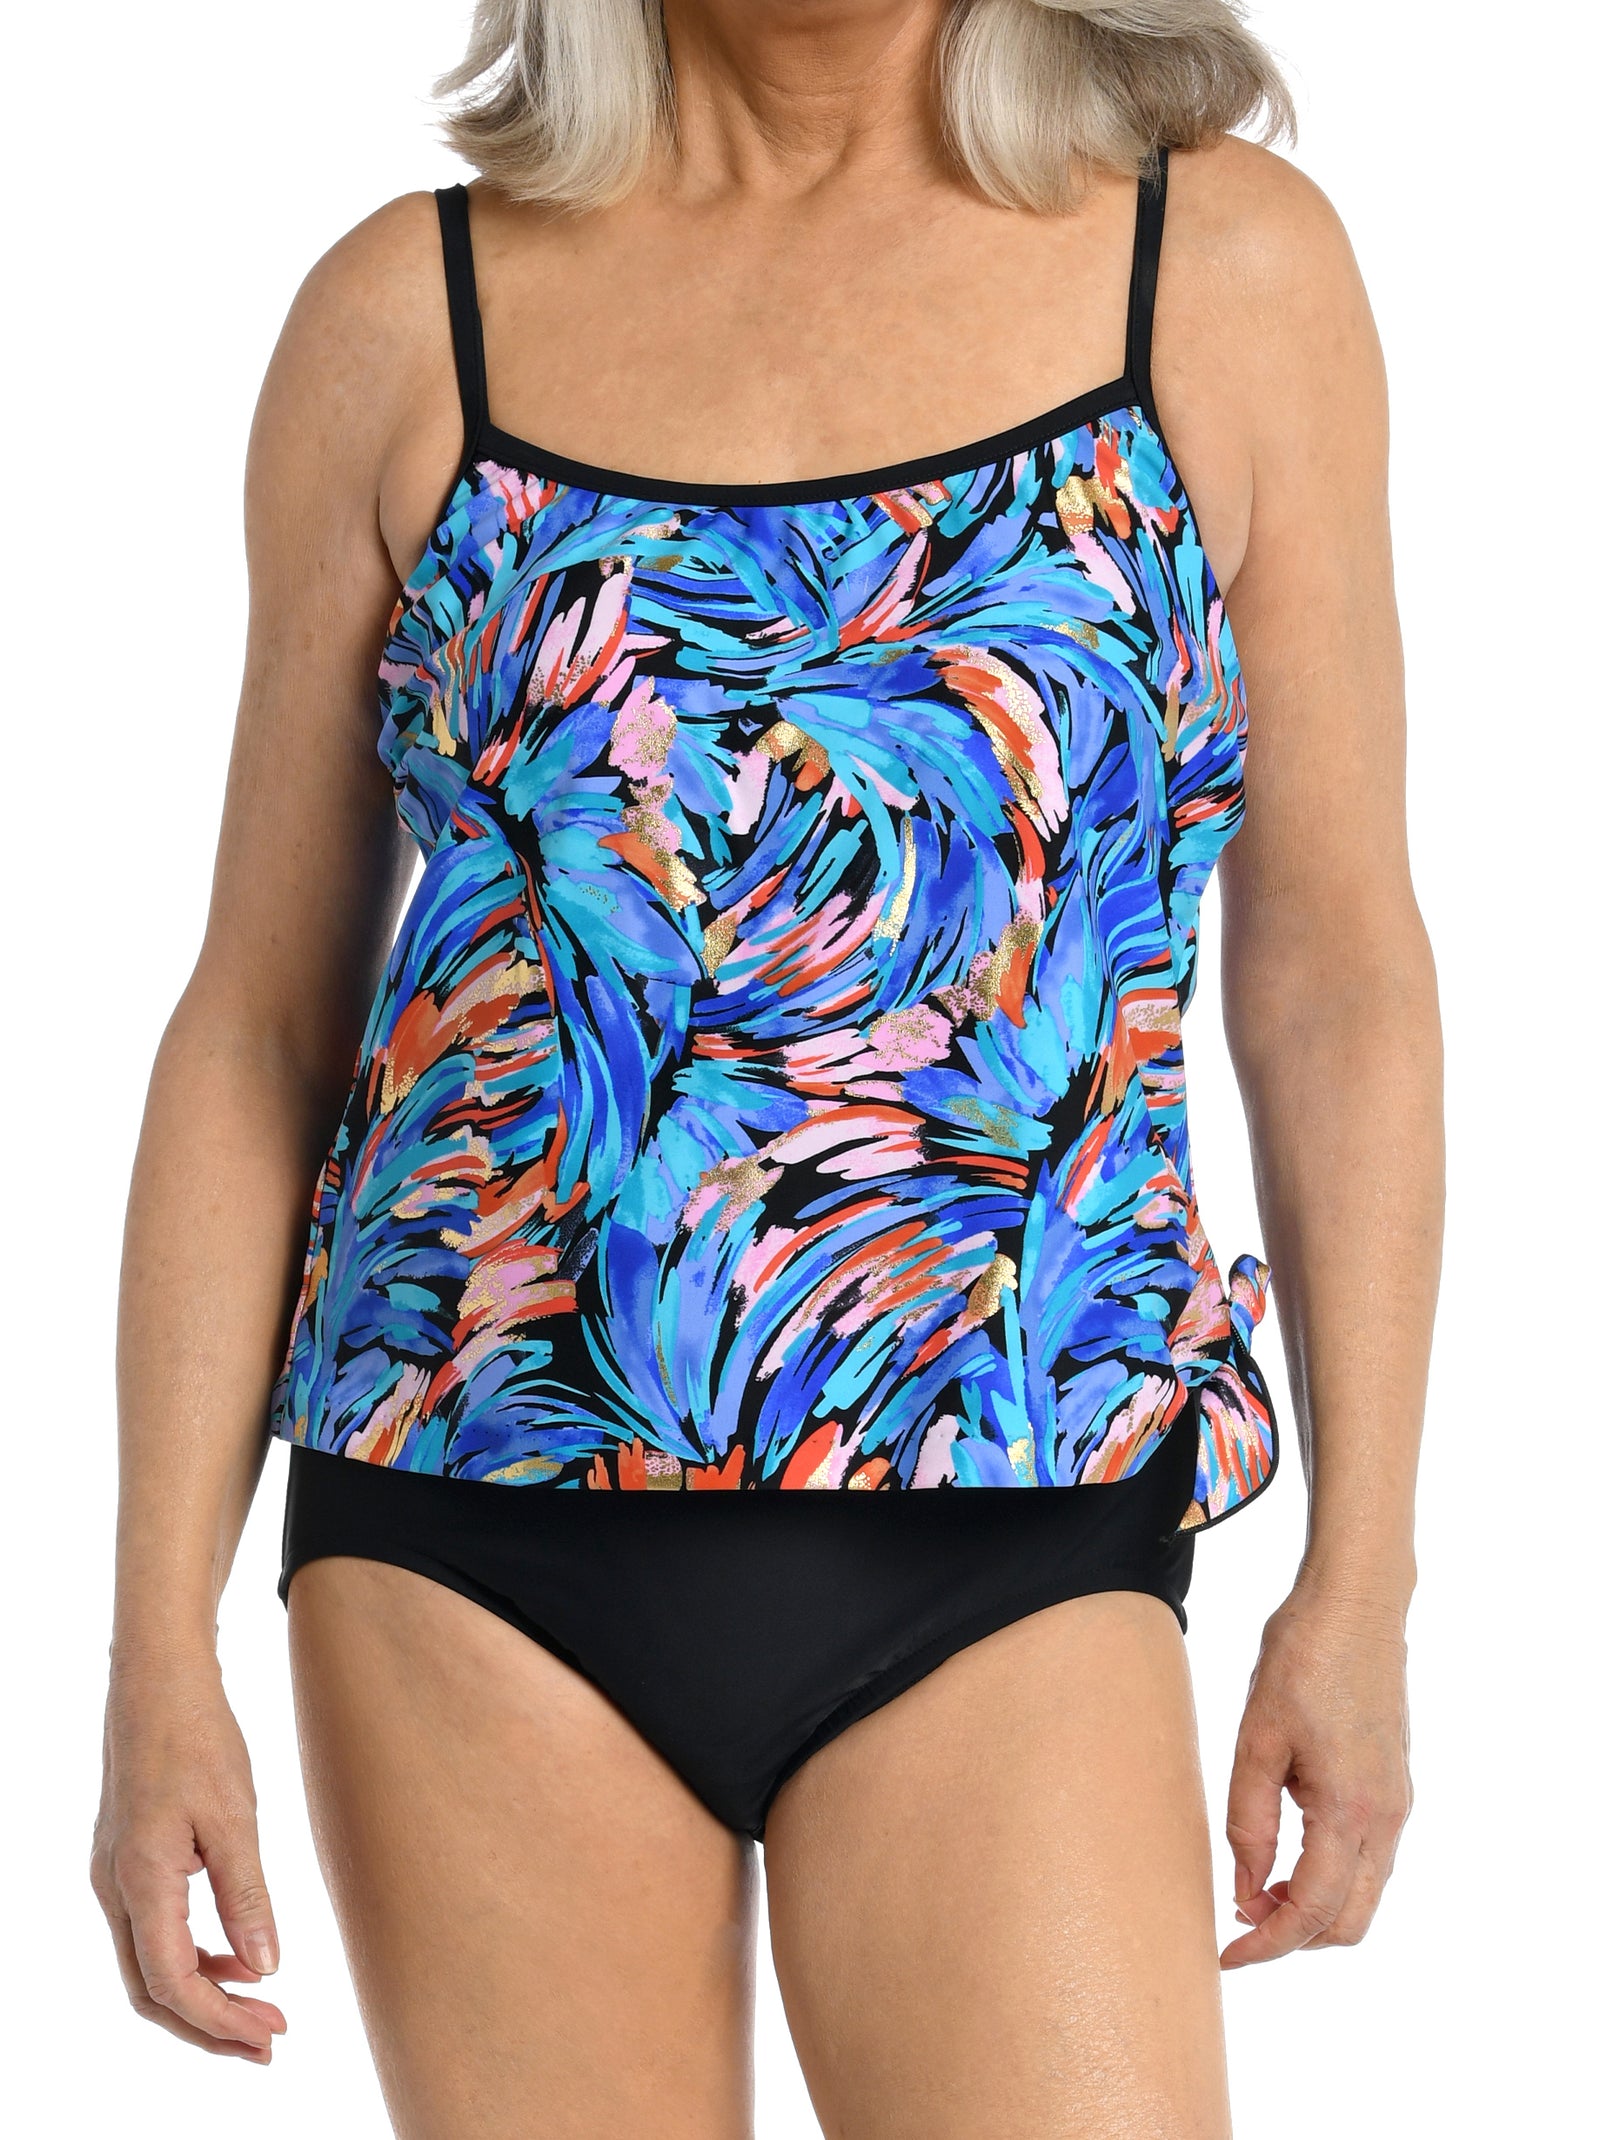 Feathers & Flair Collection  Scoop Neck Faux Tankini One Piece   Fabric Content: 82% Nylon / 18% Lycra Xtra Life Elastane  Product#: MM3CE12